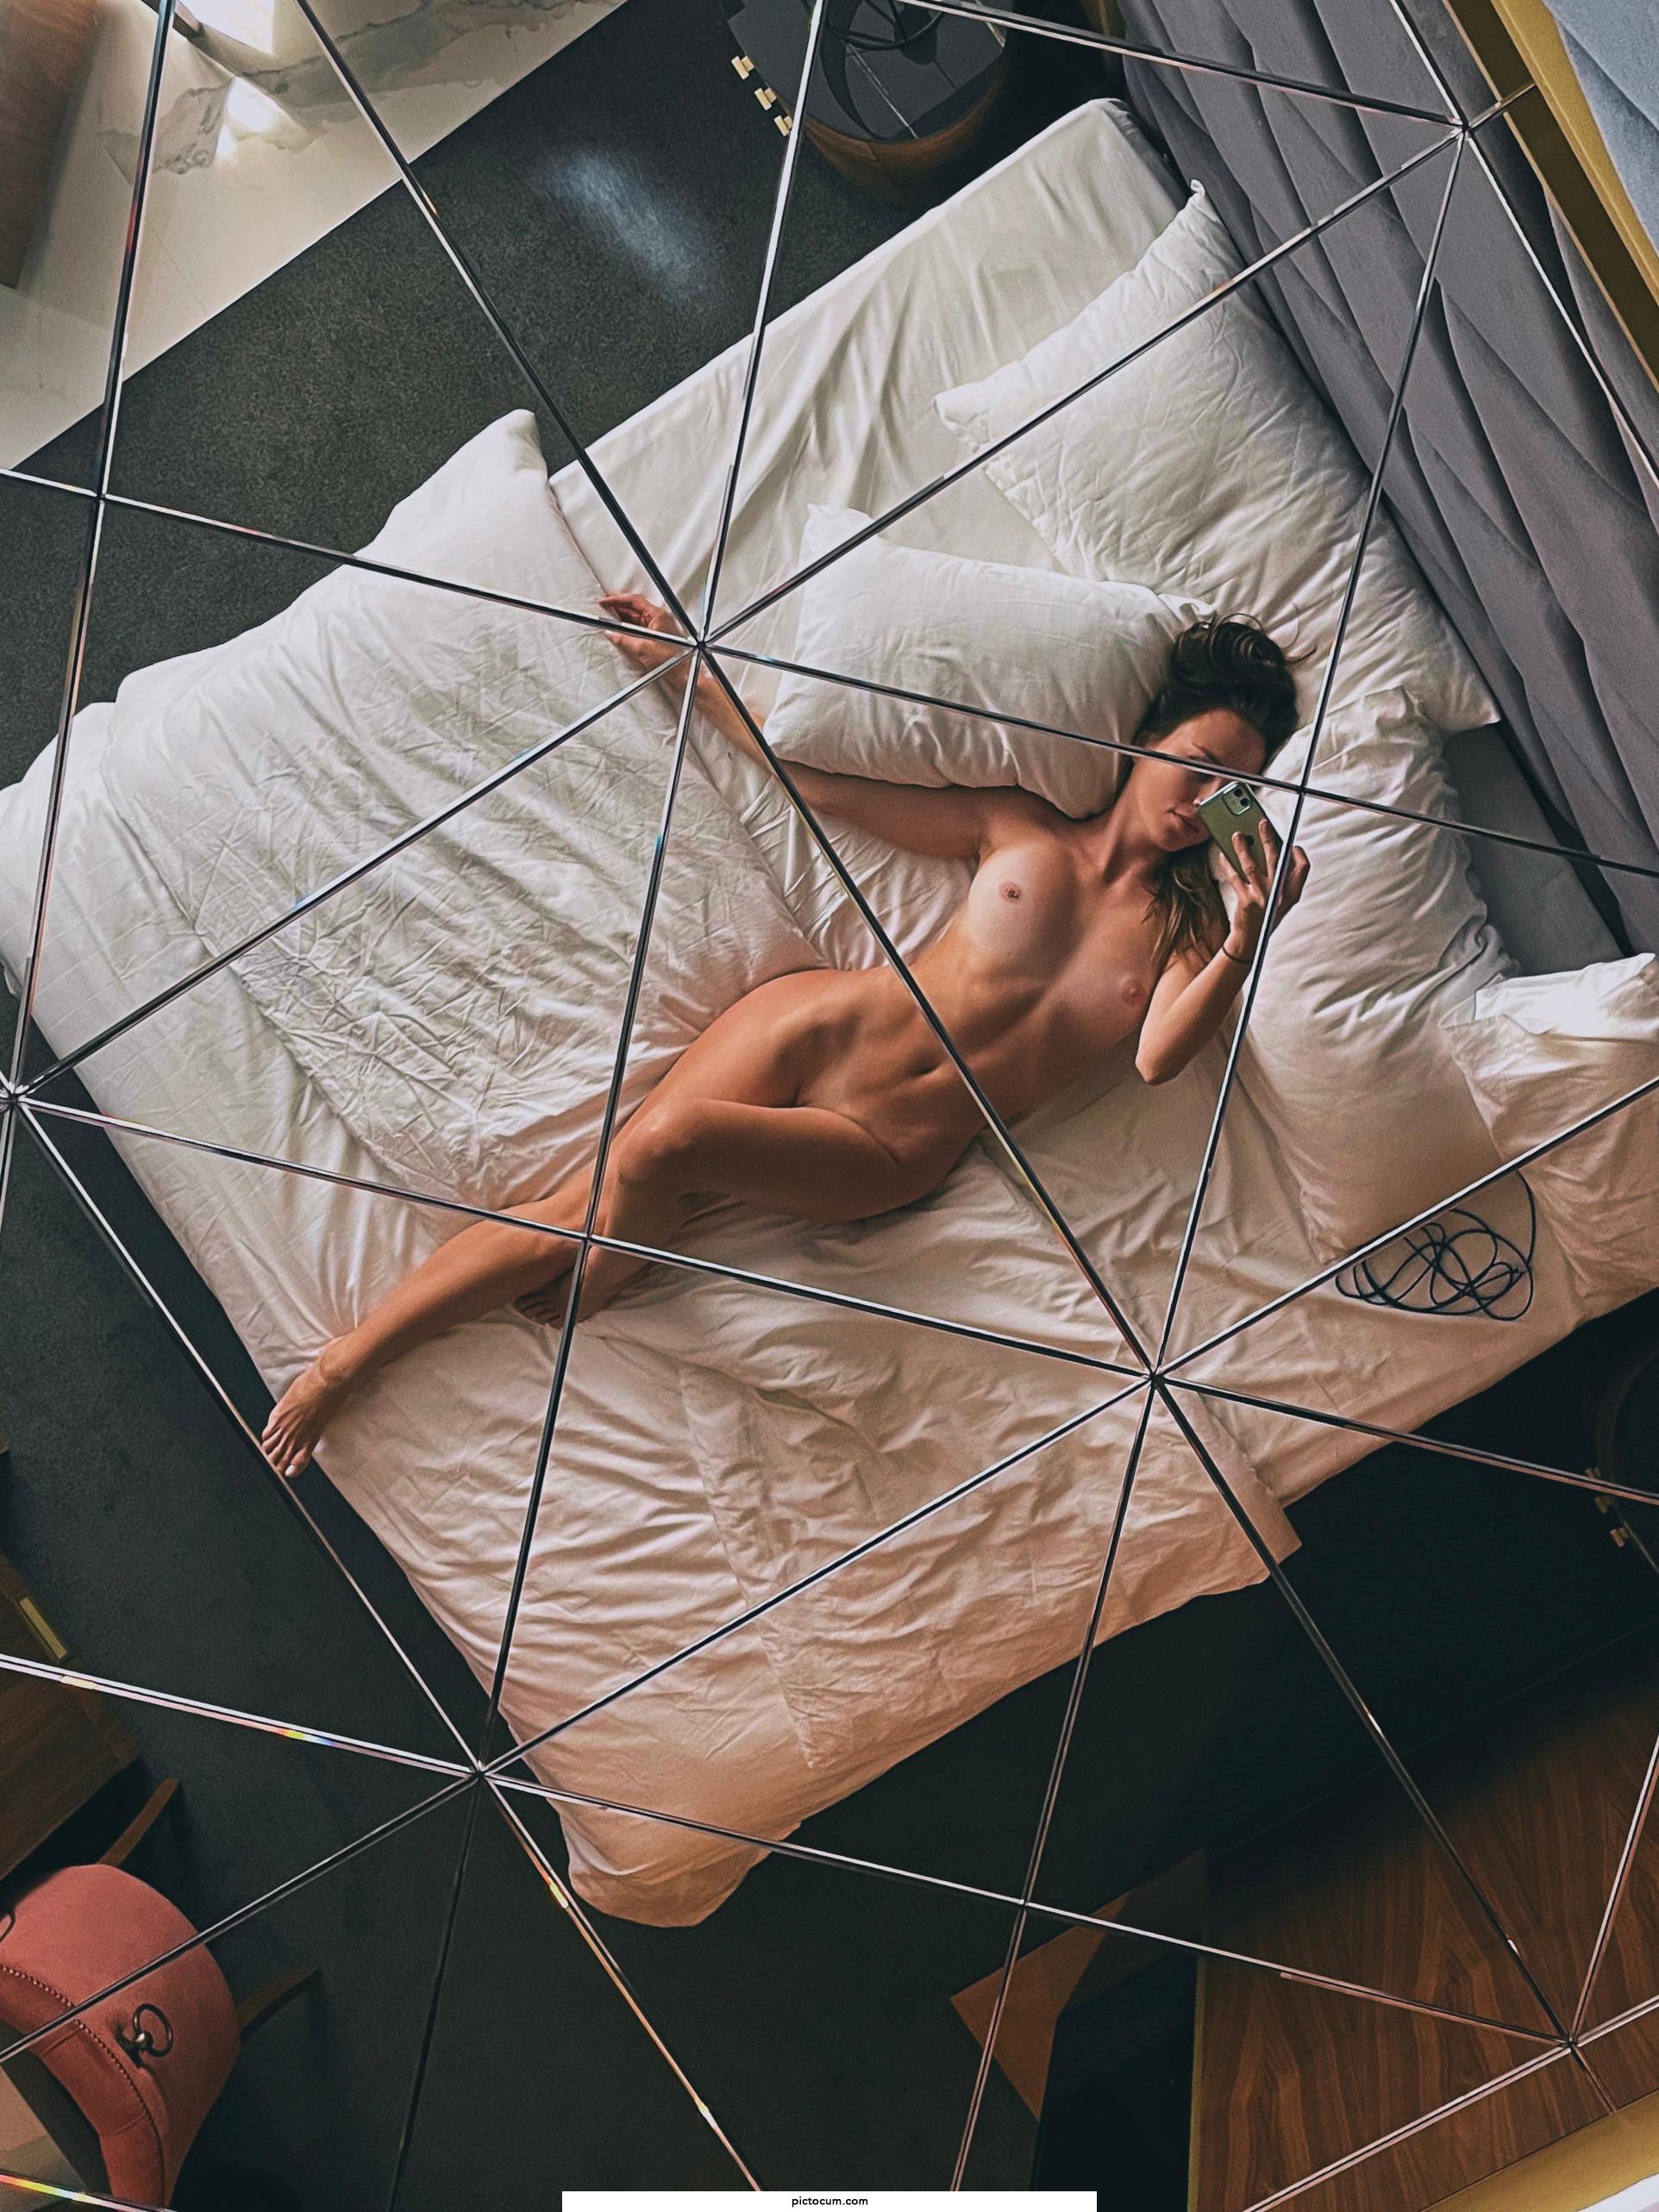 1924px x 2566px - Every bed needs a ceiling mirror when I'm in it | PicToCum